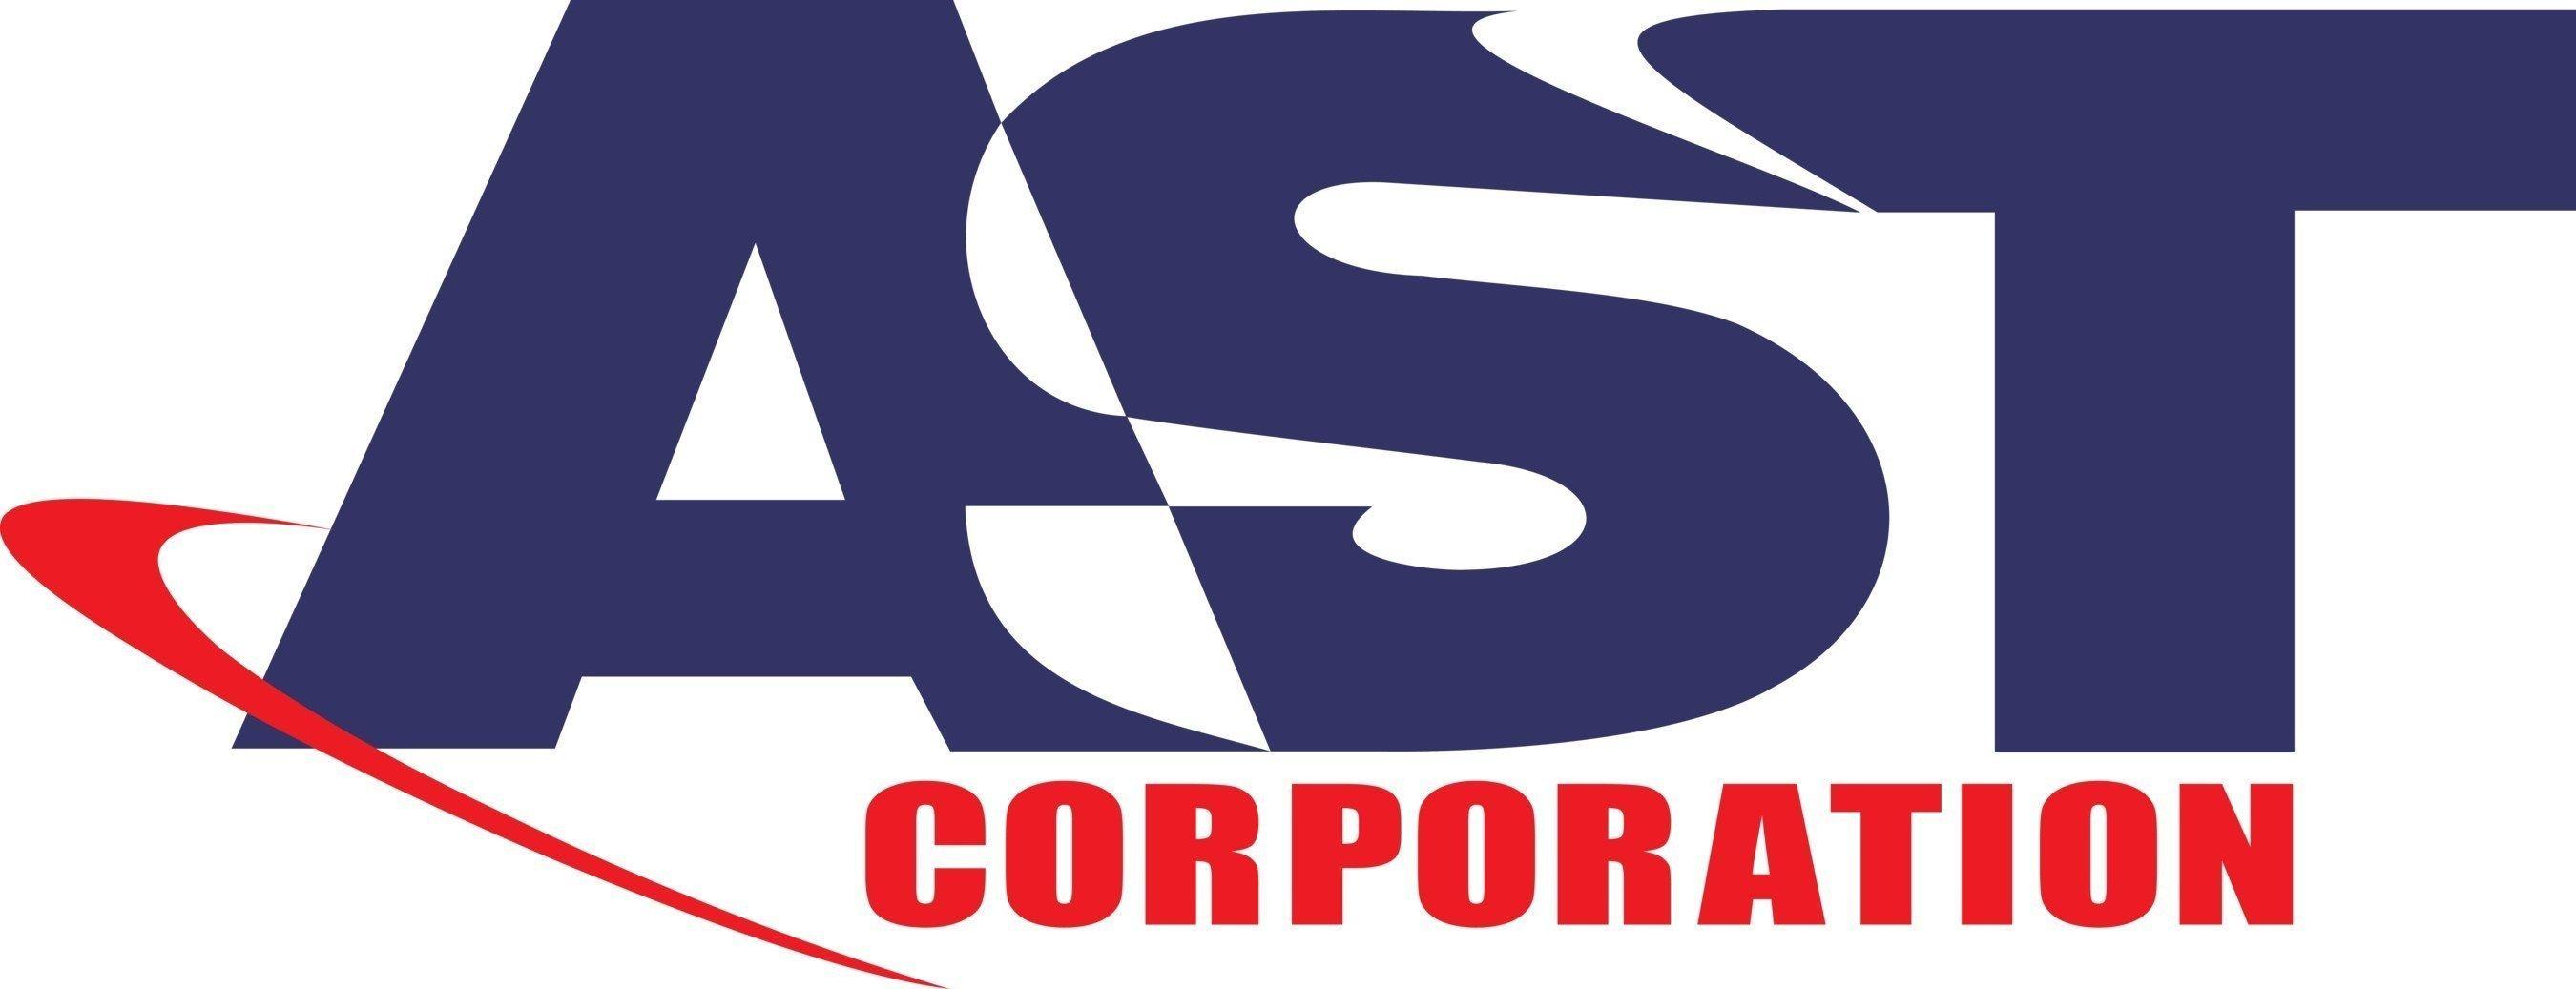 Oracle Corporation Logo - AST Implements Oracle Enterprise Resource Planning Cloud and ...